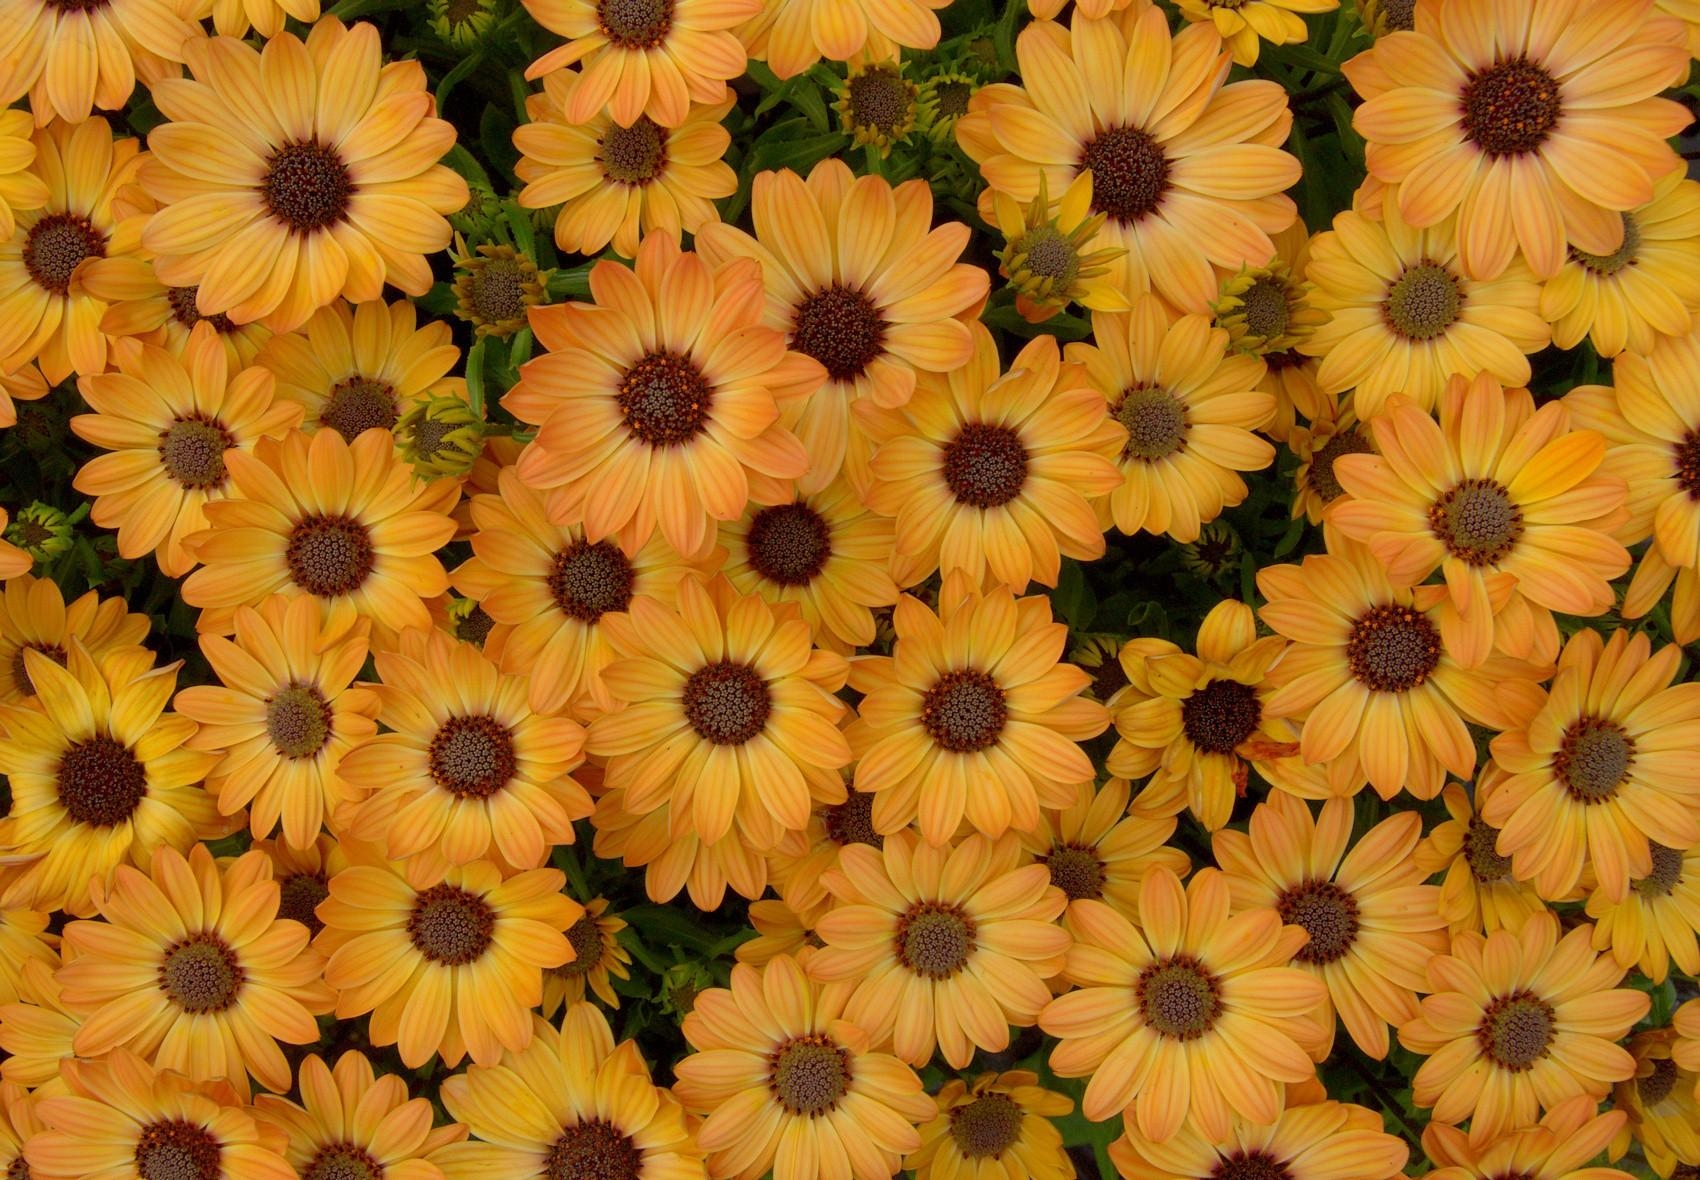 petals, flowers, yellow, flower bed, flowerbed, dimorfoteka, dimorphotheque Full HD